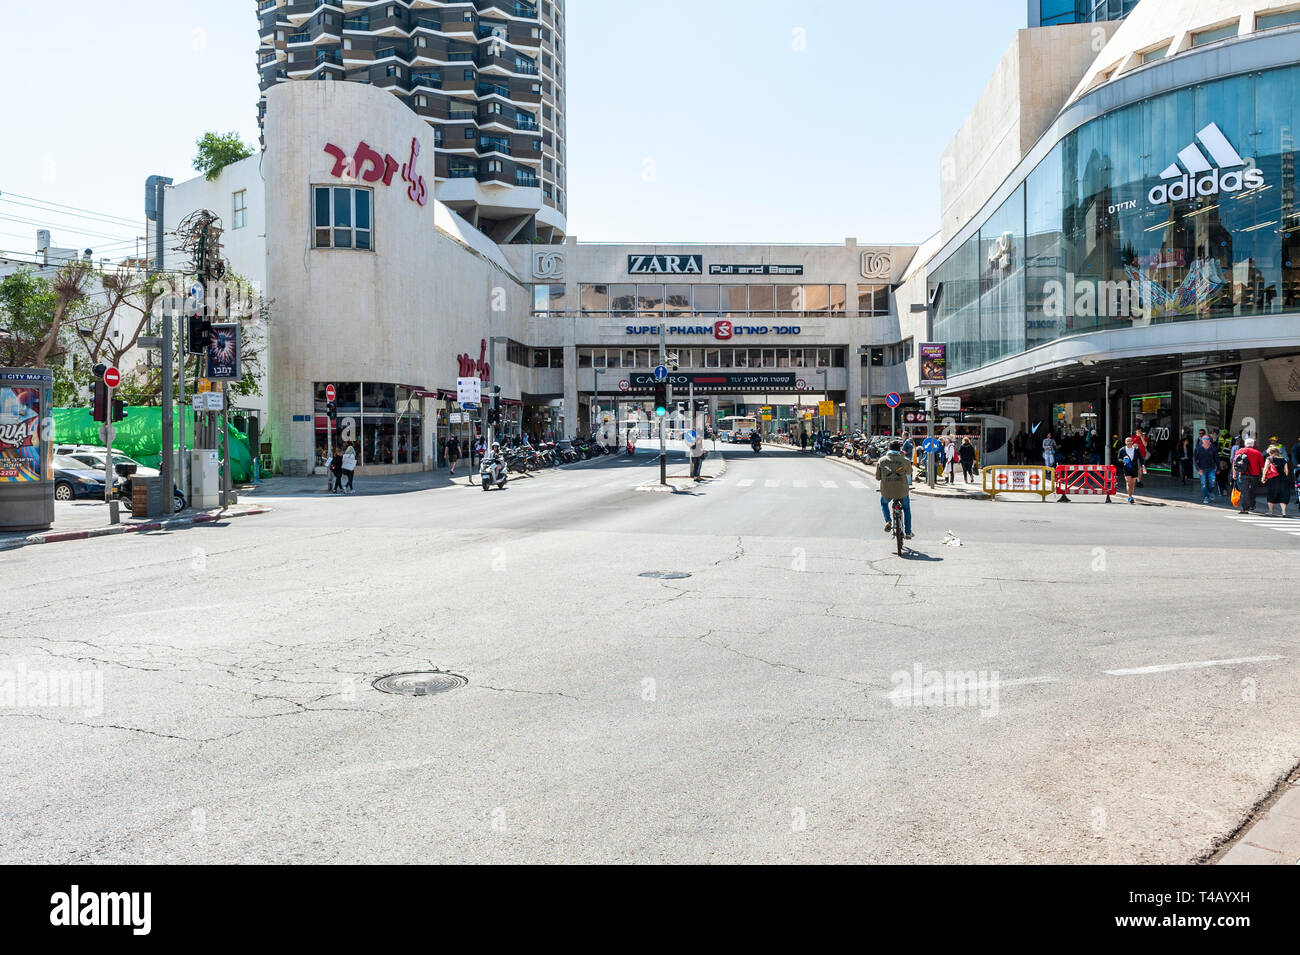 Tlv Mall High Resolution Stock Photography and Images - Alamy